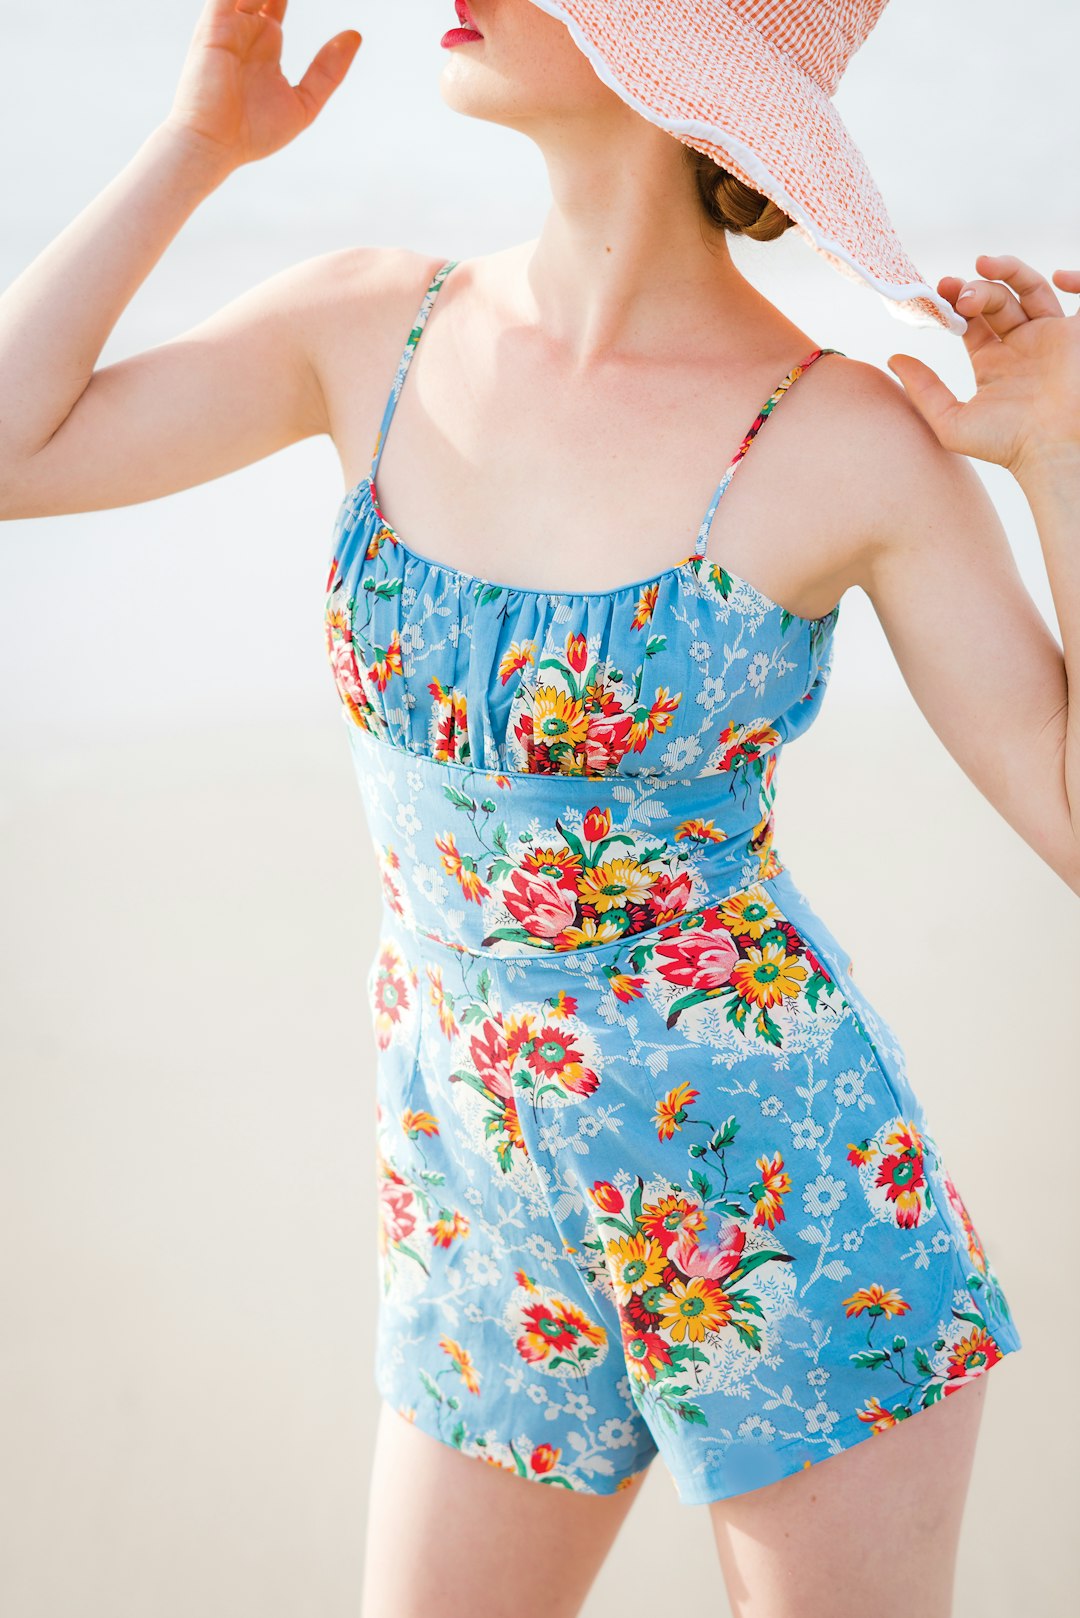 woman wearing blue floral rompers and brown hat